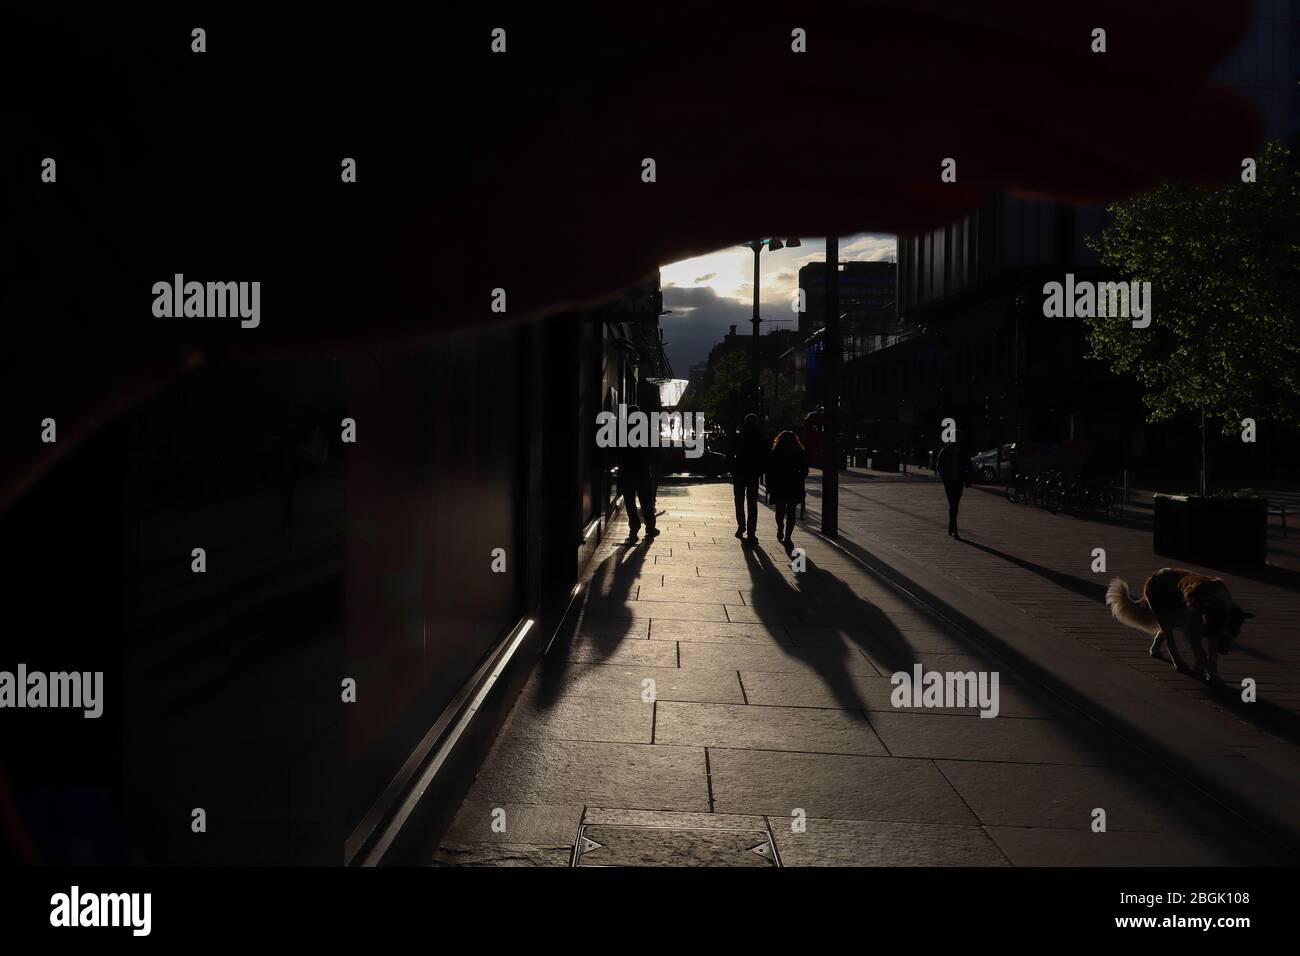 Concept 'Light at the end of the tunnel.' Several people in silhouette cast long shadows down a sidewalk in a backlit section of a street in Glasgow. Stock Photo